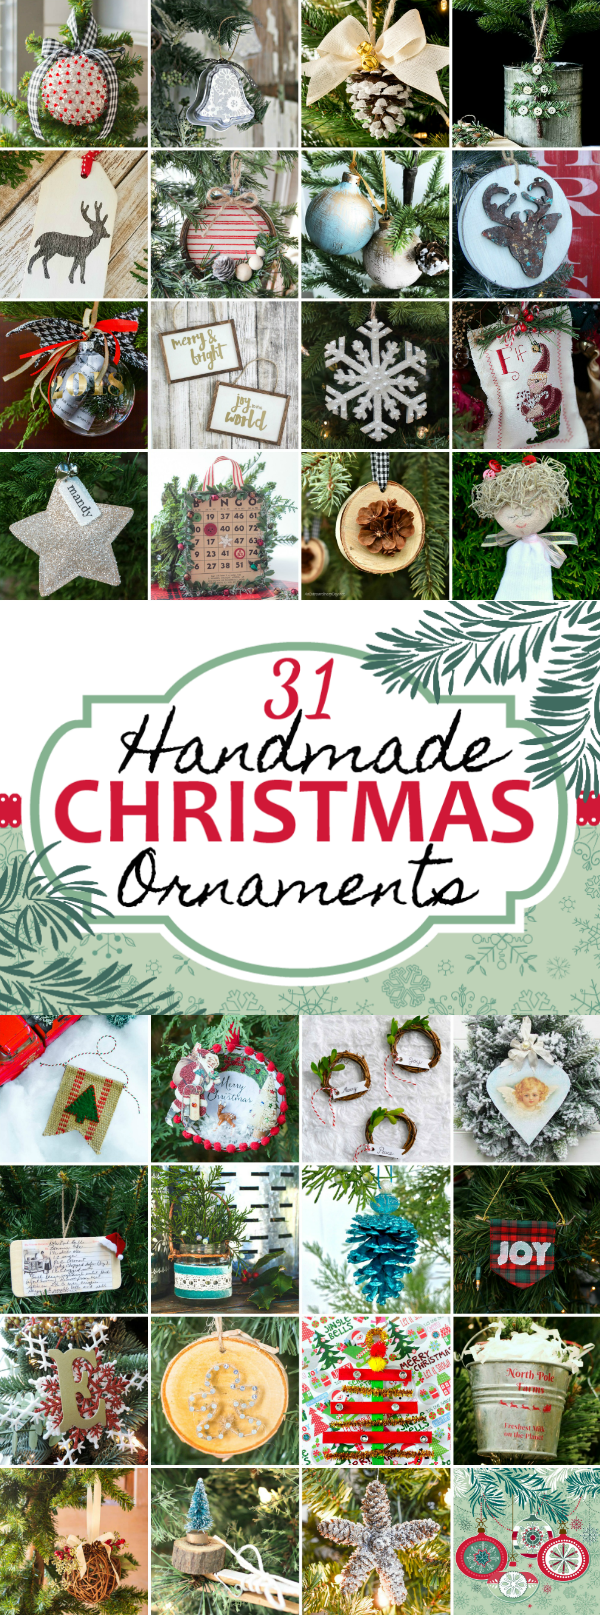 31 Days of Handmade Christmas Ornaments - Don't miss these crafty Christmas idea for decorating the tree! #handmadechristmas #christmasornaments #decoratethetree